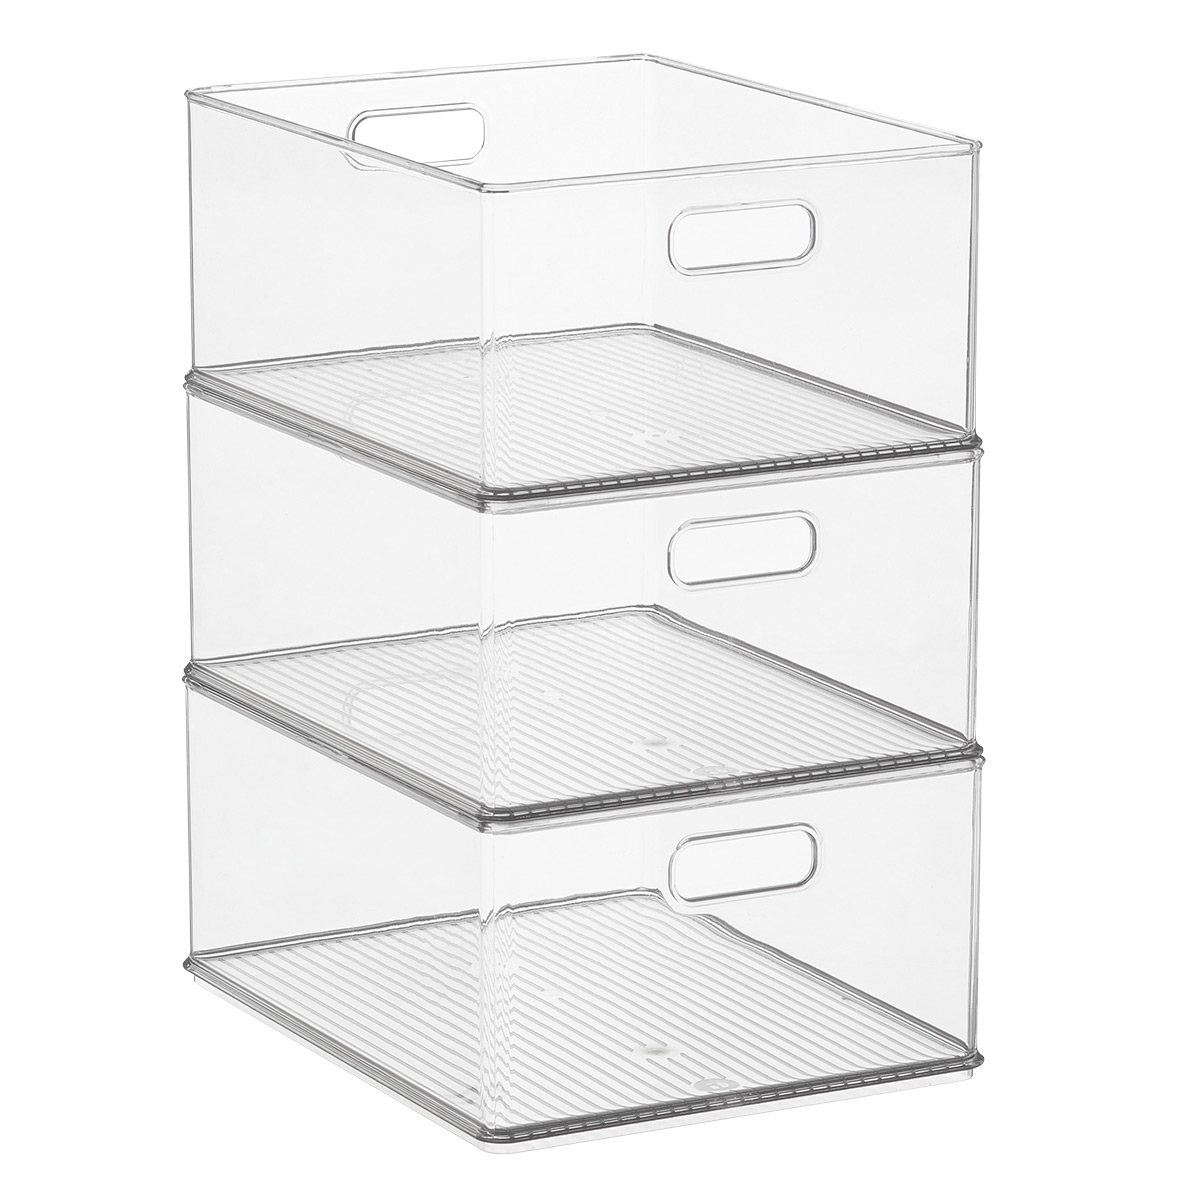 https://www.containerstore.com/catalogimages/477953/10092636-idesign-3-case-small-stacka.jpg